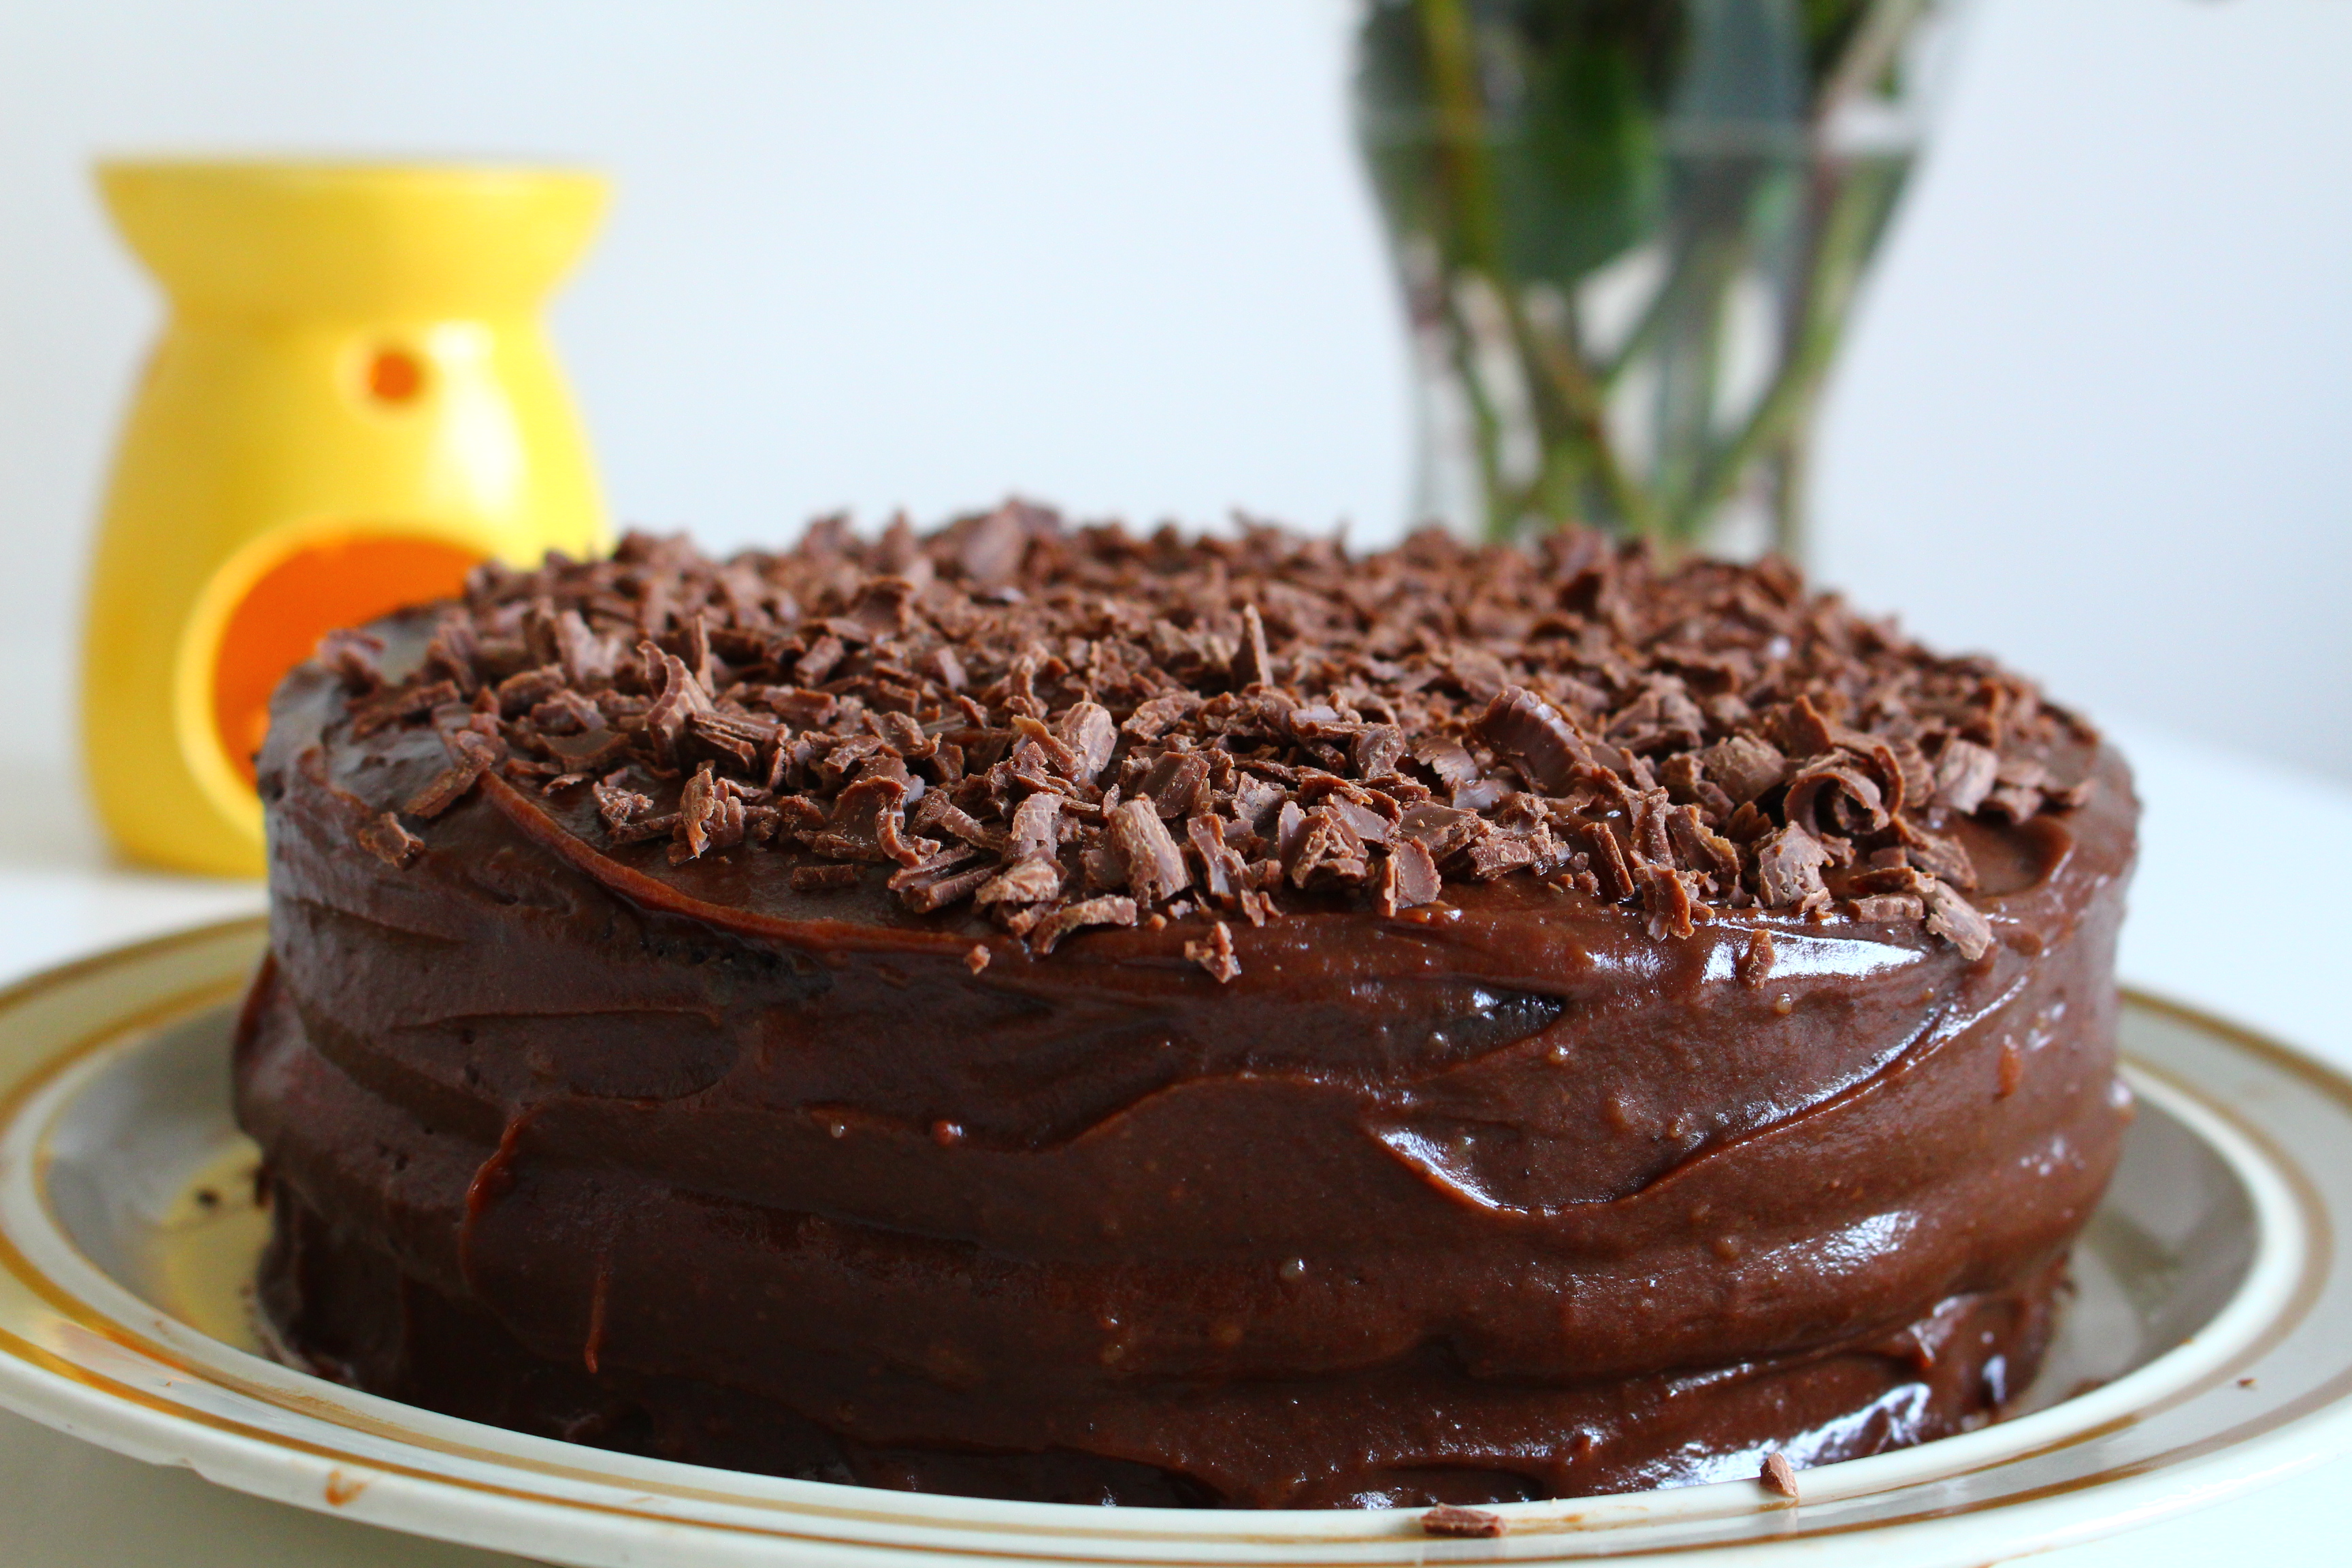 Chocolate Fudge Cake is ready to be served